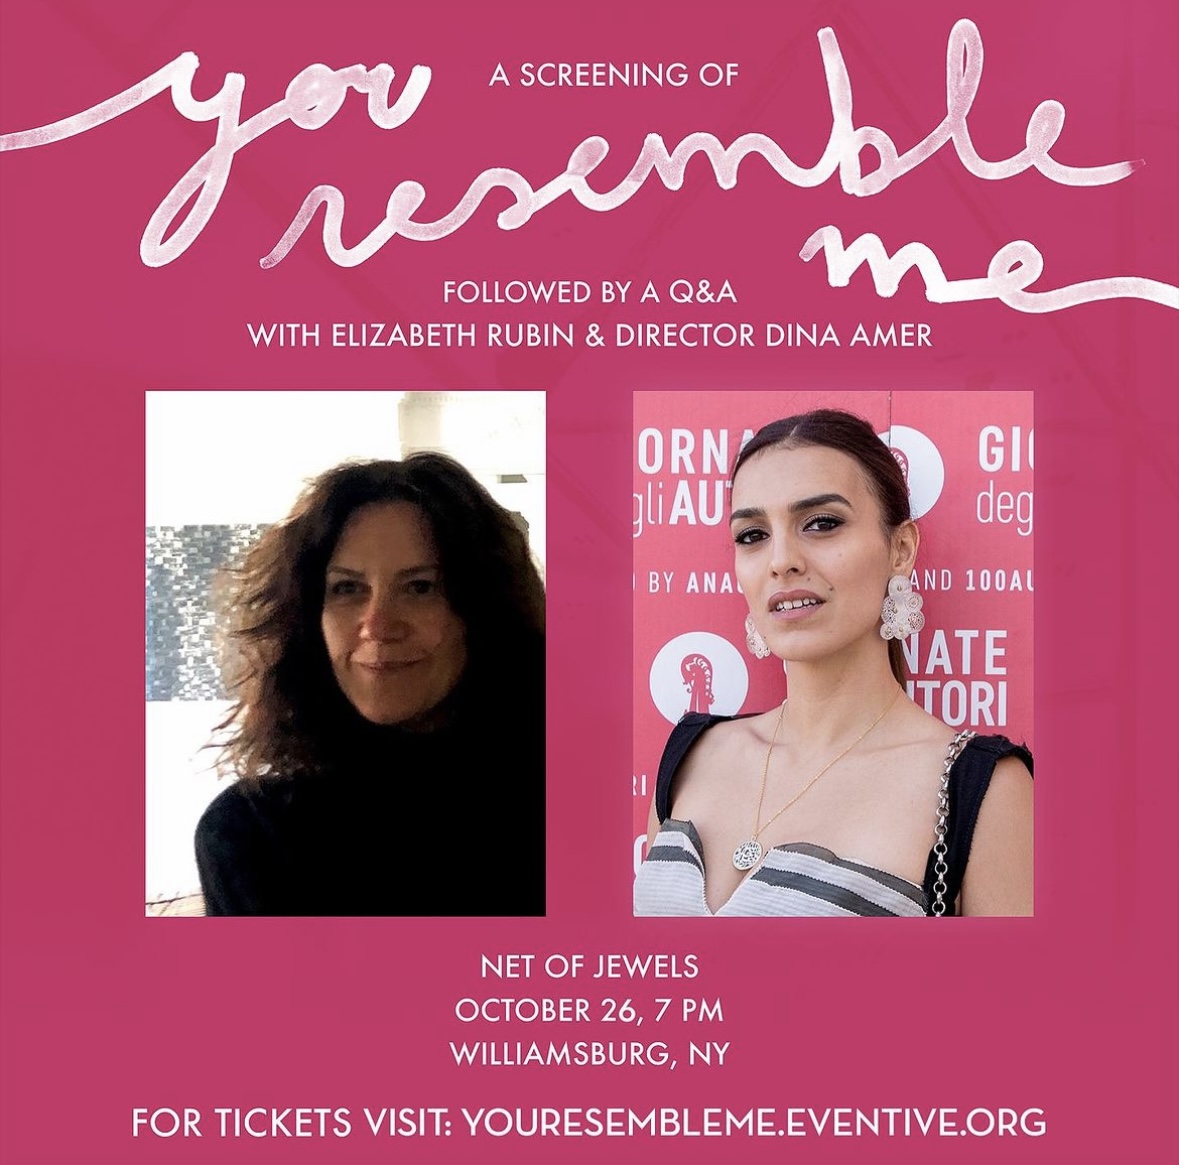 NYC! Catch this upcoming screening of YOU RESEMBLE ME on October 26th. Award winning journalist Elizabeth Rubin will be joining Director Dina Amer for a Q&A following the screening. Don't miss it! #YouResembleMe 

Tickets: youresembleme.eventive.org/schedule